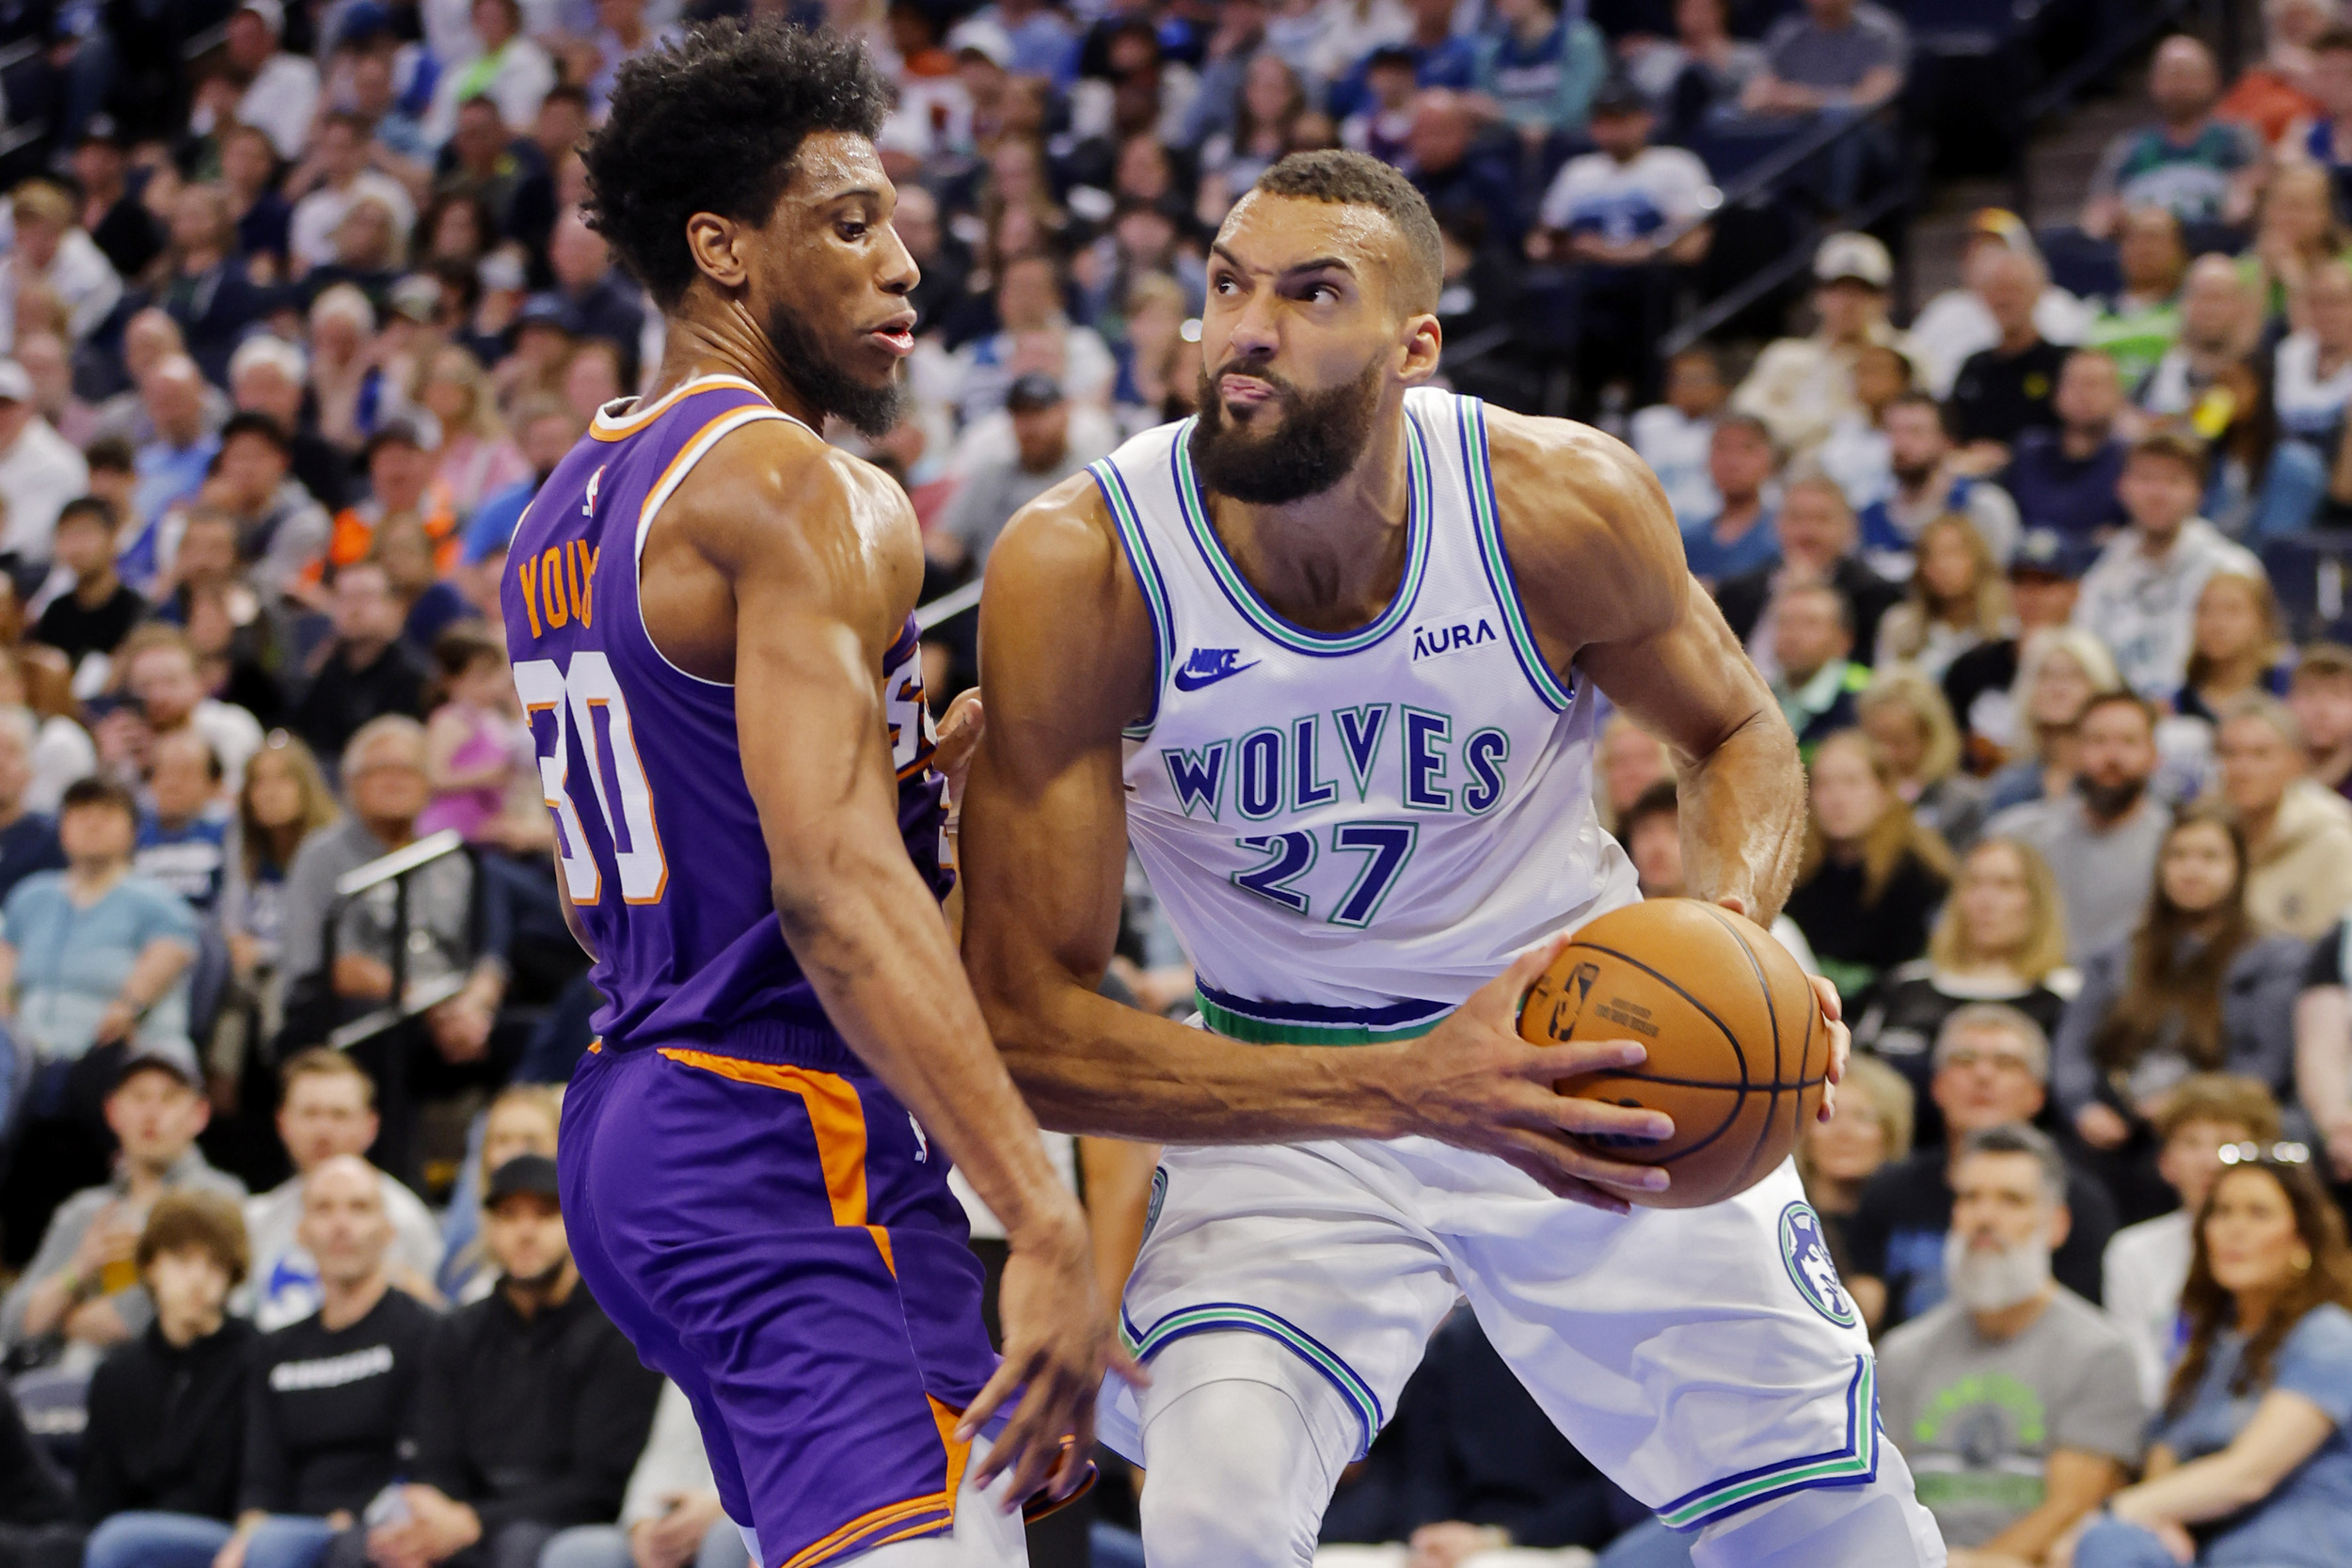 timberwolves star voted most overrated player in the nba